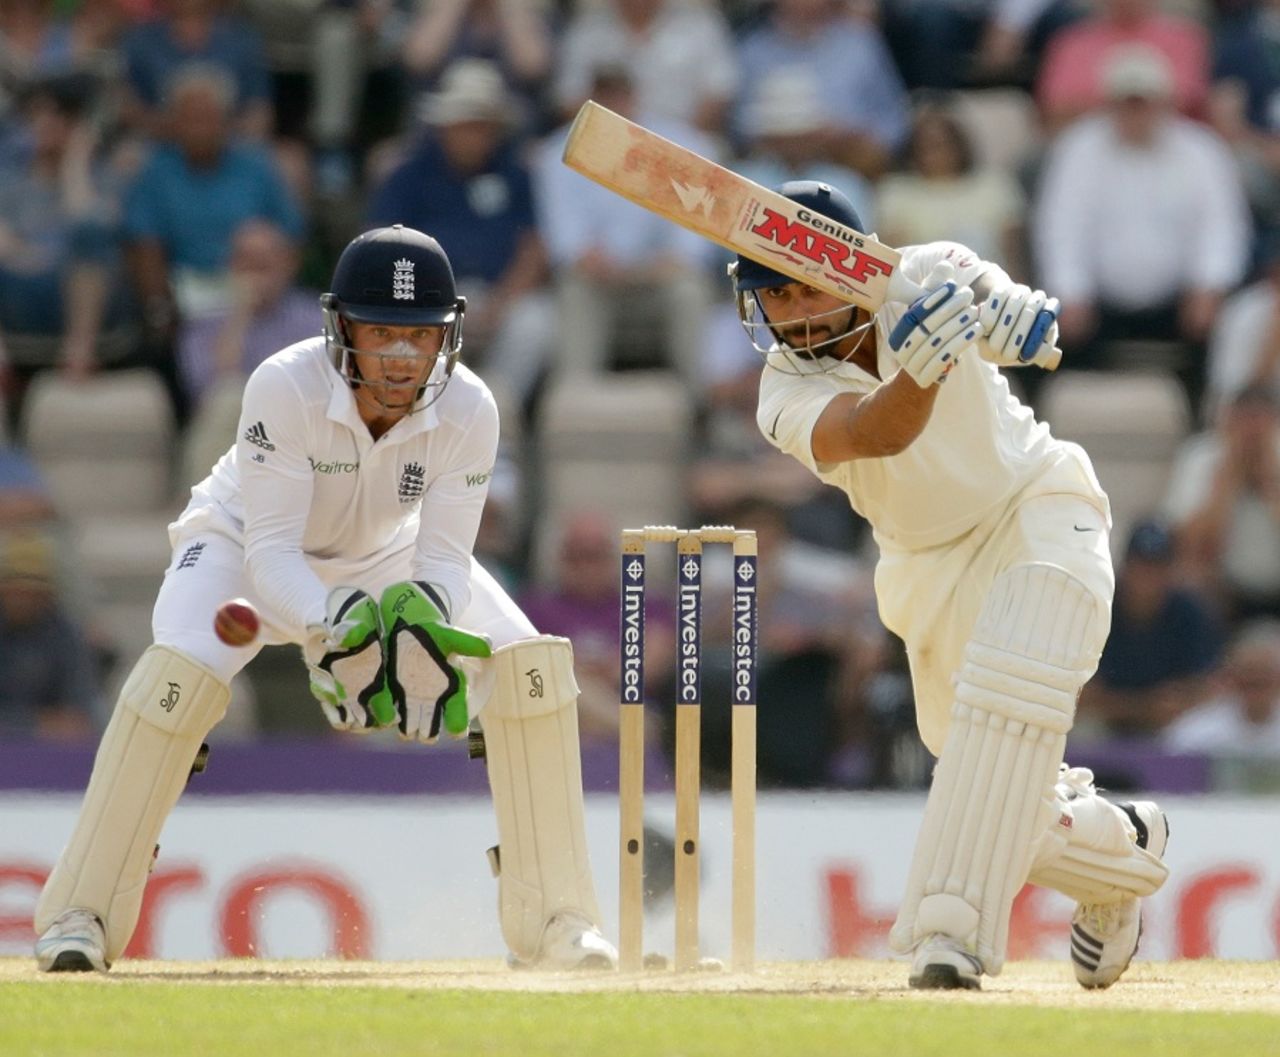 Virat Kohli was eager to get on the front foot, England v India, 3rd Investec Test, Ageas Bowl, 4th day, July 30, 2014